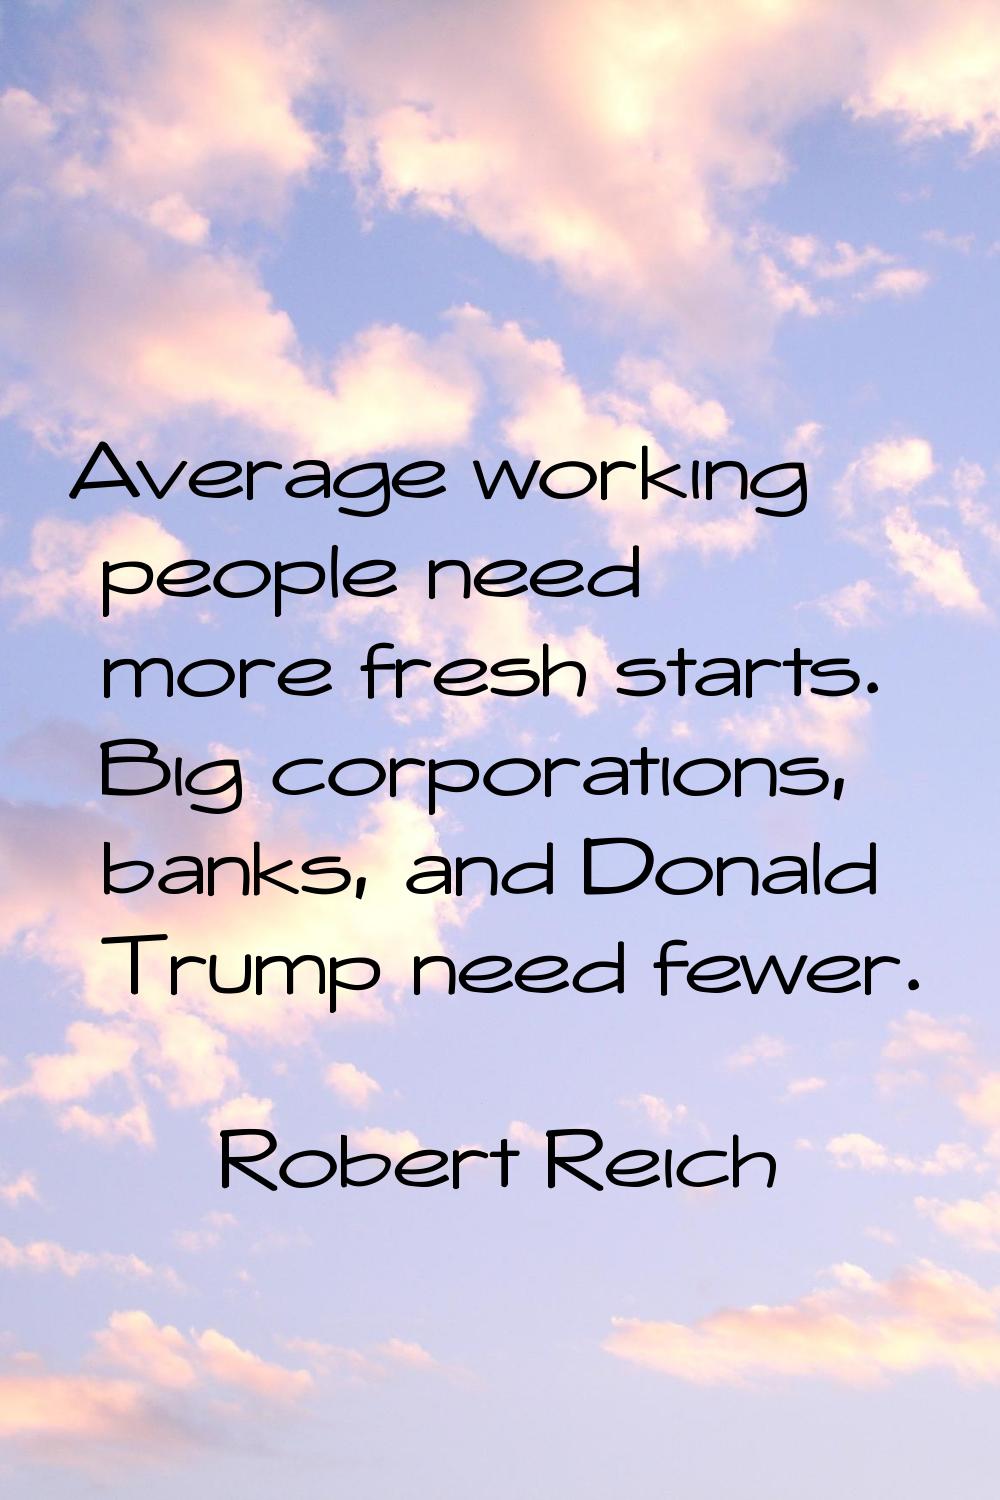 Average working people need more fresh starts. Big corporations, banks, and Donald Trump need fewer